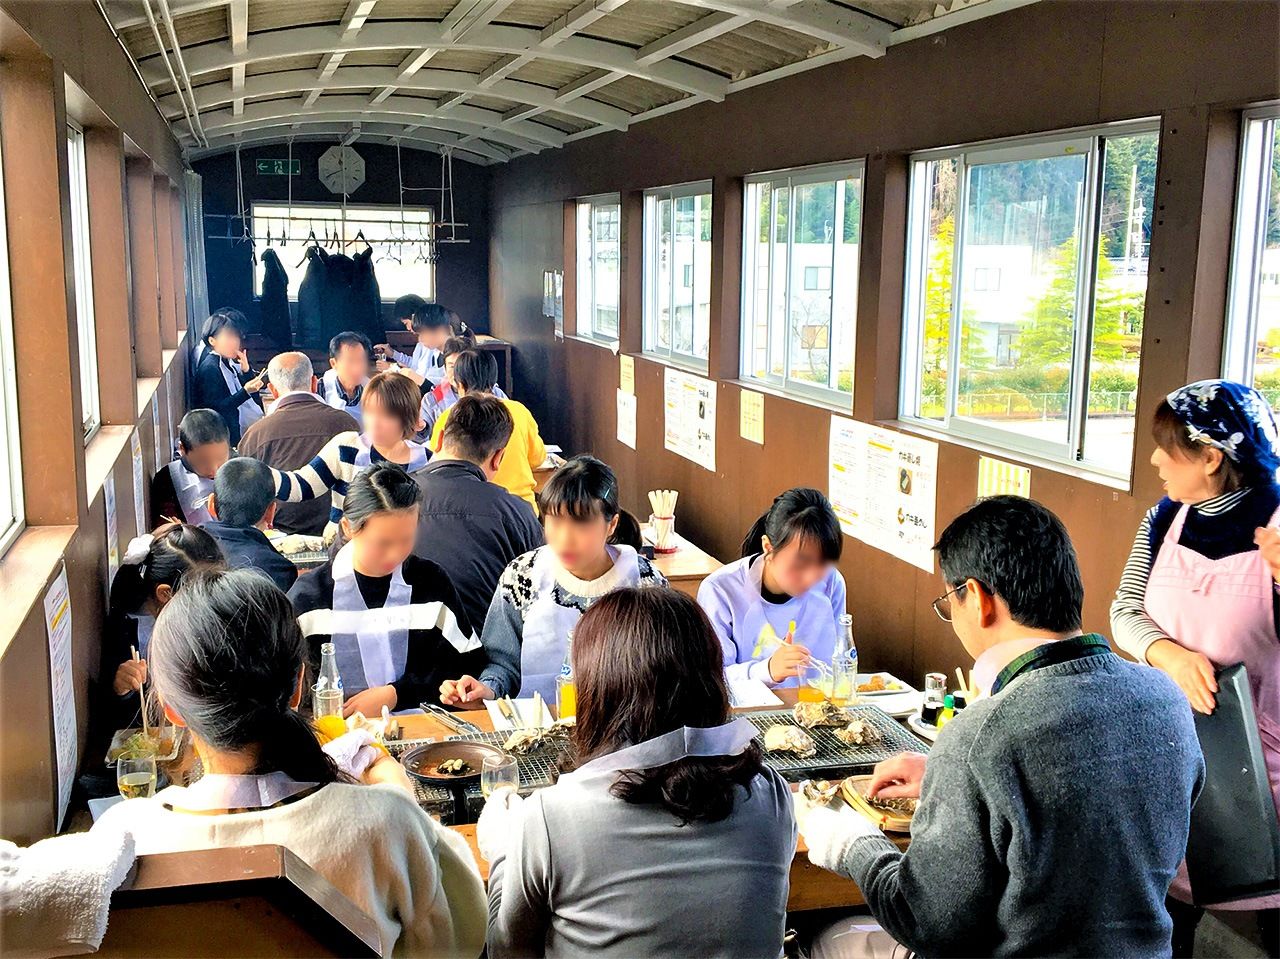 Atsuatsu-tei is open every year from mid-January to mid-March on weekends and public holidays. It is exclusive to Noto Satoyama Satoumi train passengers, but reservations are required.